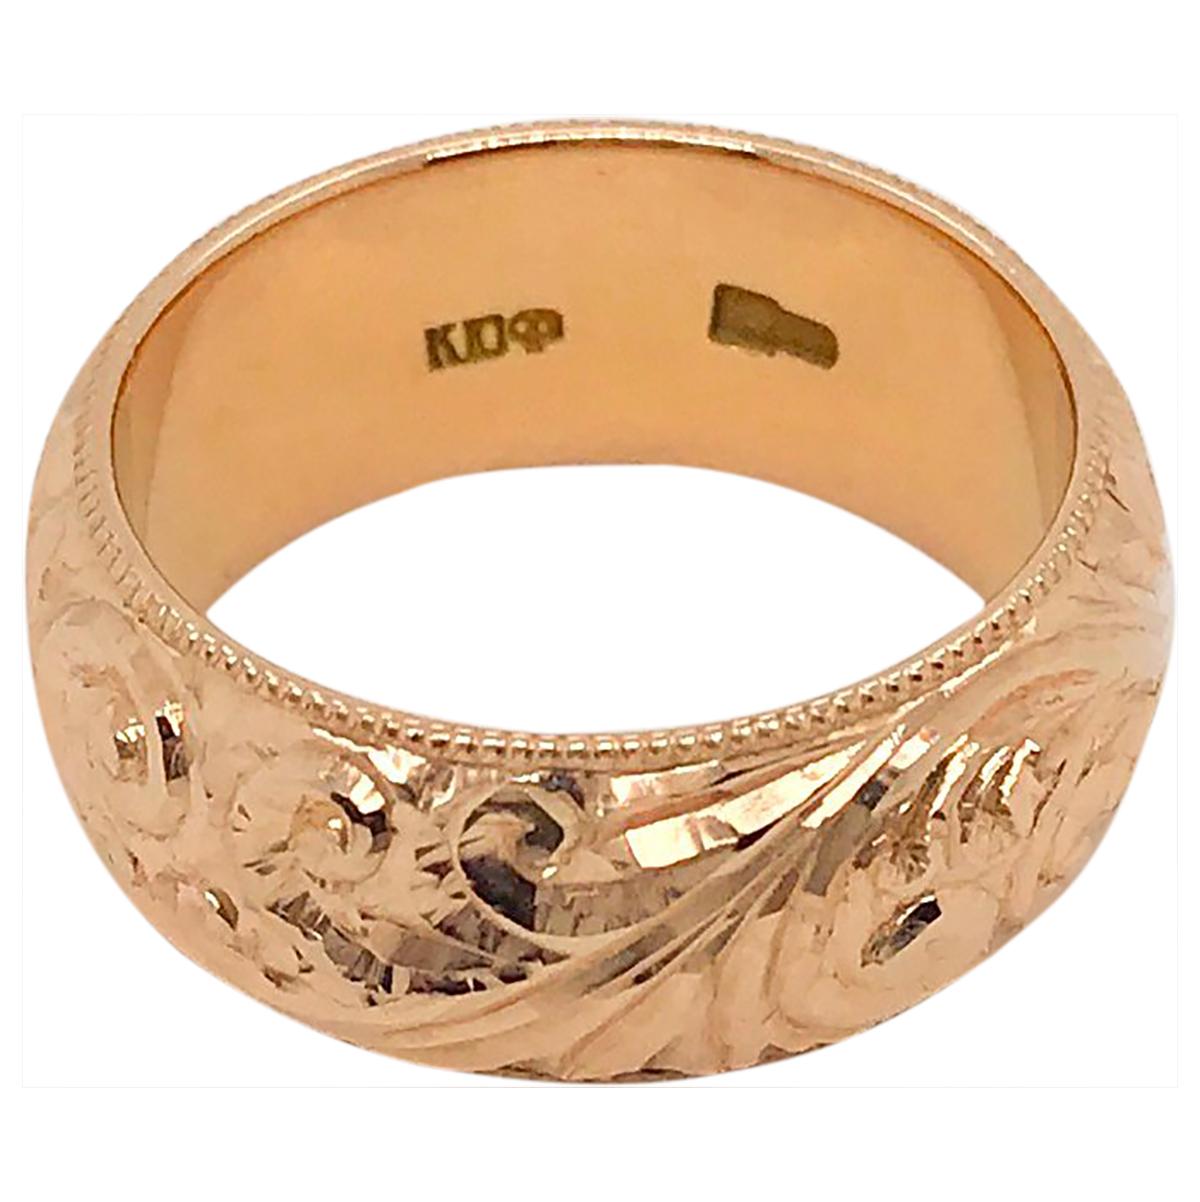 Don't you just love engraved bands? This one is exceptional, it's wide, weighty and looks gorgeous on it's own or stacked with other bands. Looks perfect with two narrow diamond bands either side as well. A beautiful pale rose gold with a soft pink